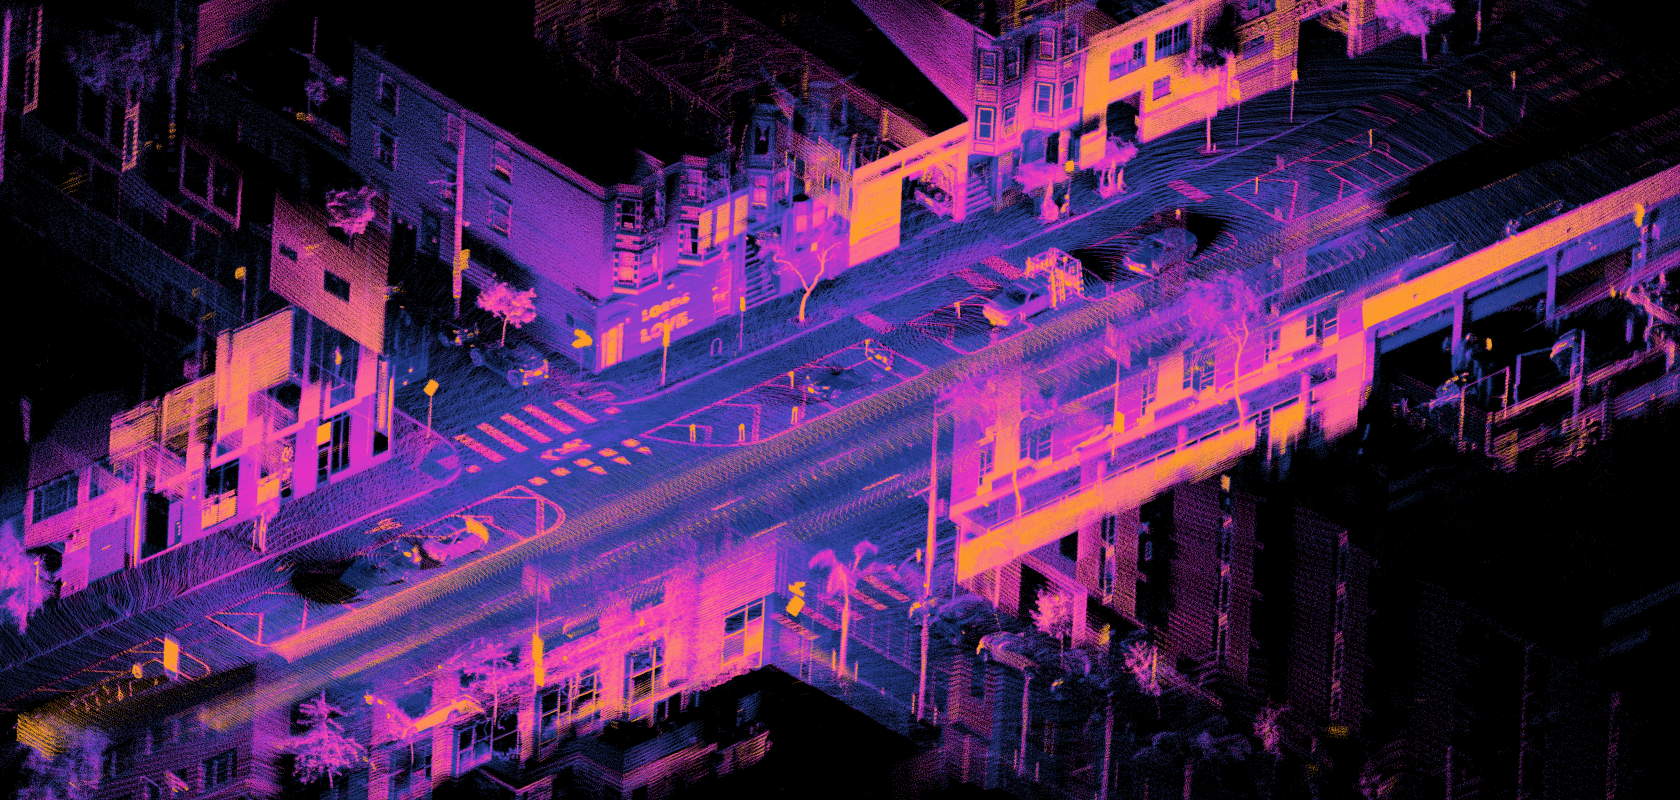 Image created with a lidar sensor on a moving car